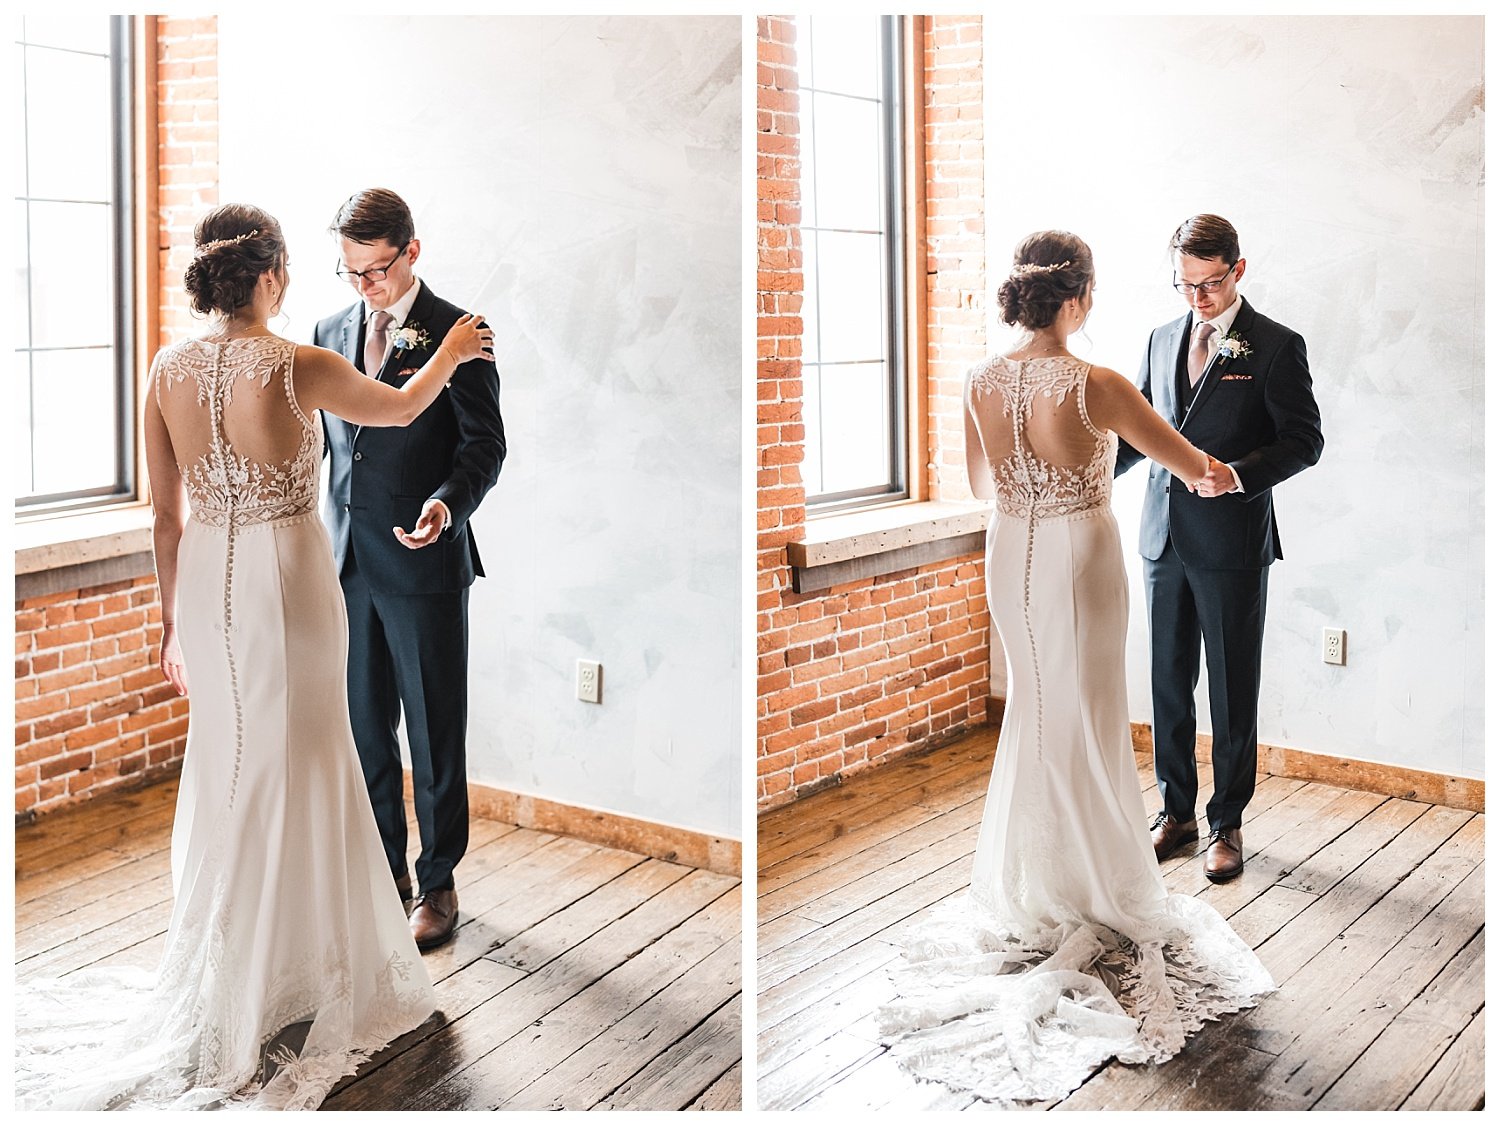 The Booking House wedding, Manheim PA, bride and groom first look